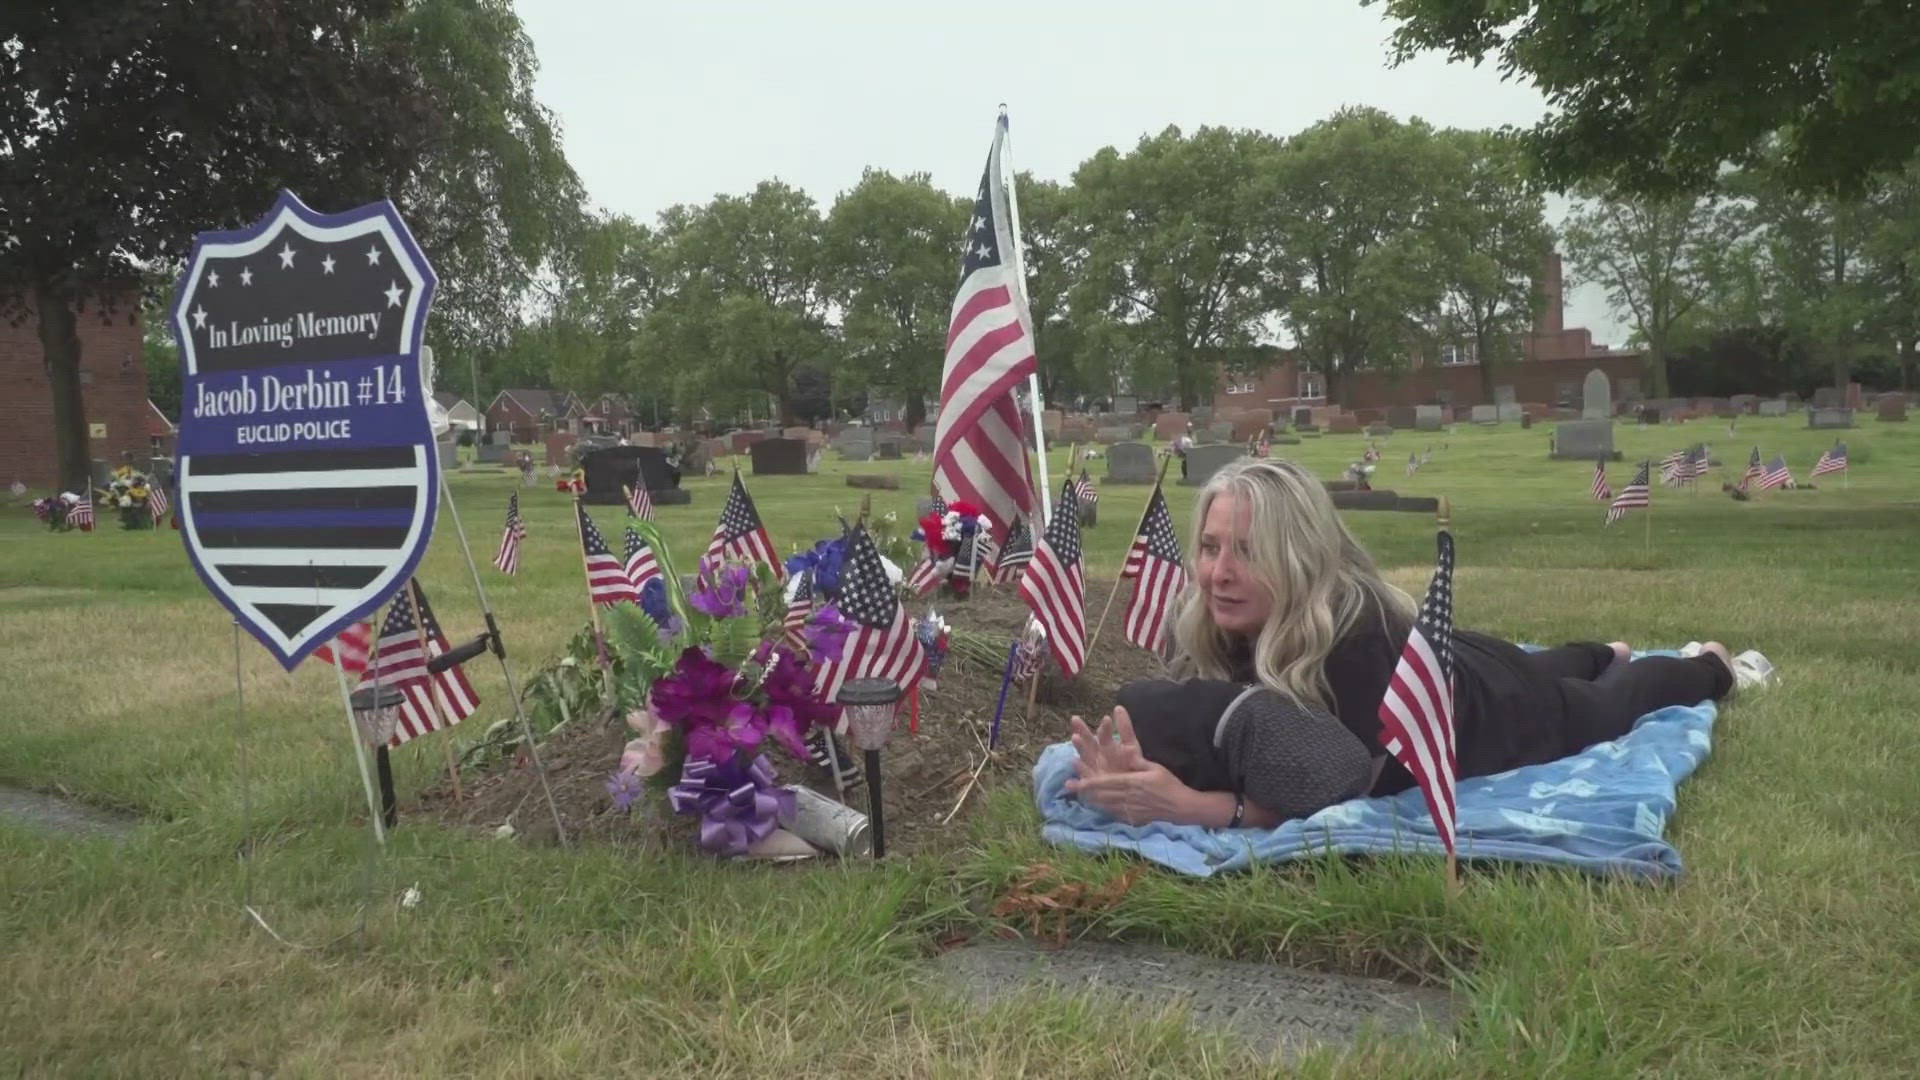 Dawn Derbin has been living a nightmare since her son was killed in the line of duty. She's honoring his legacy by living the way he did. Lindsay Buckingham reports.